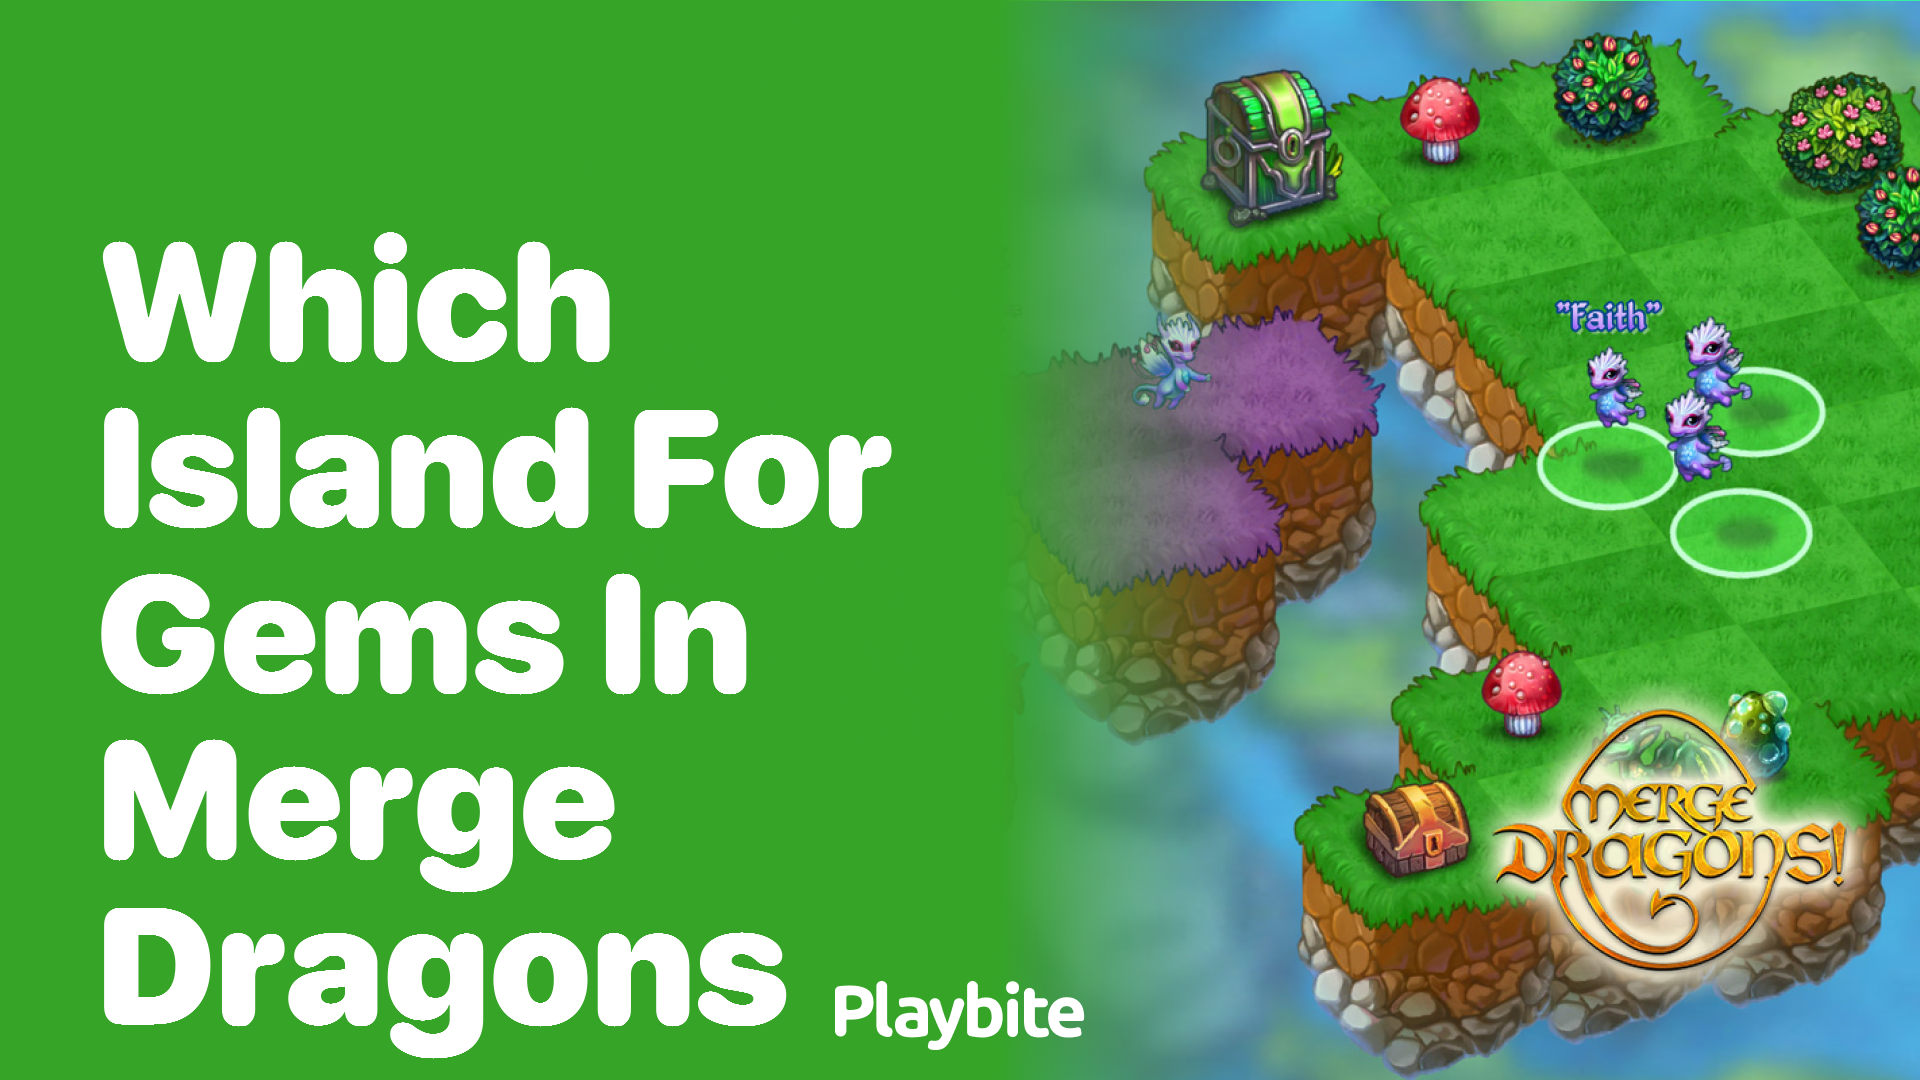 Which island is best for gems in Merge Dragons?